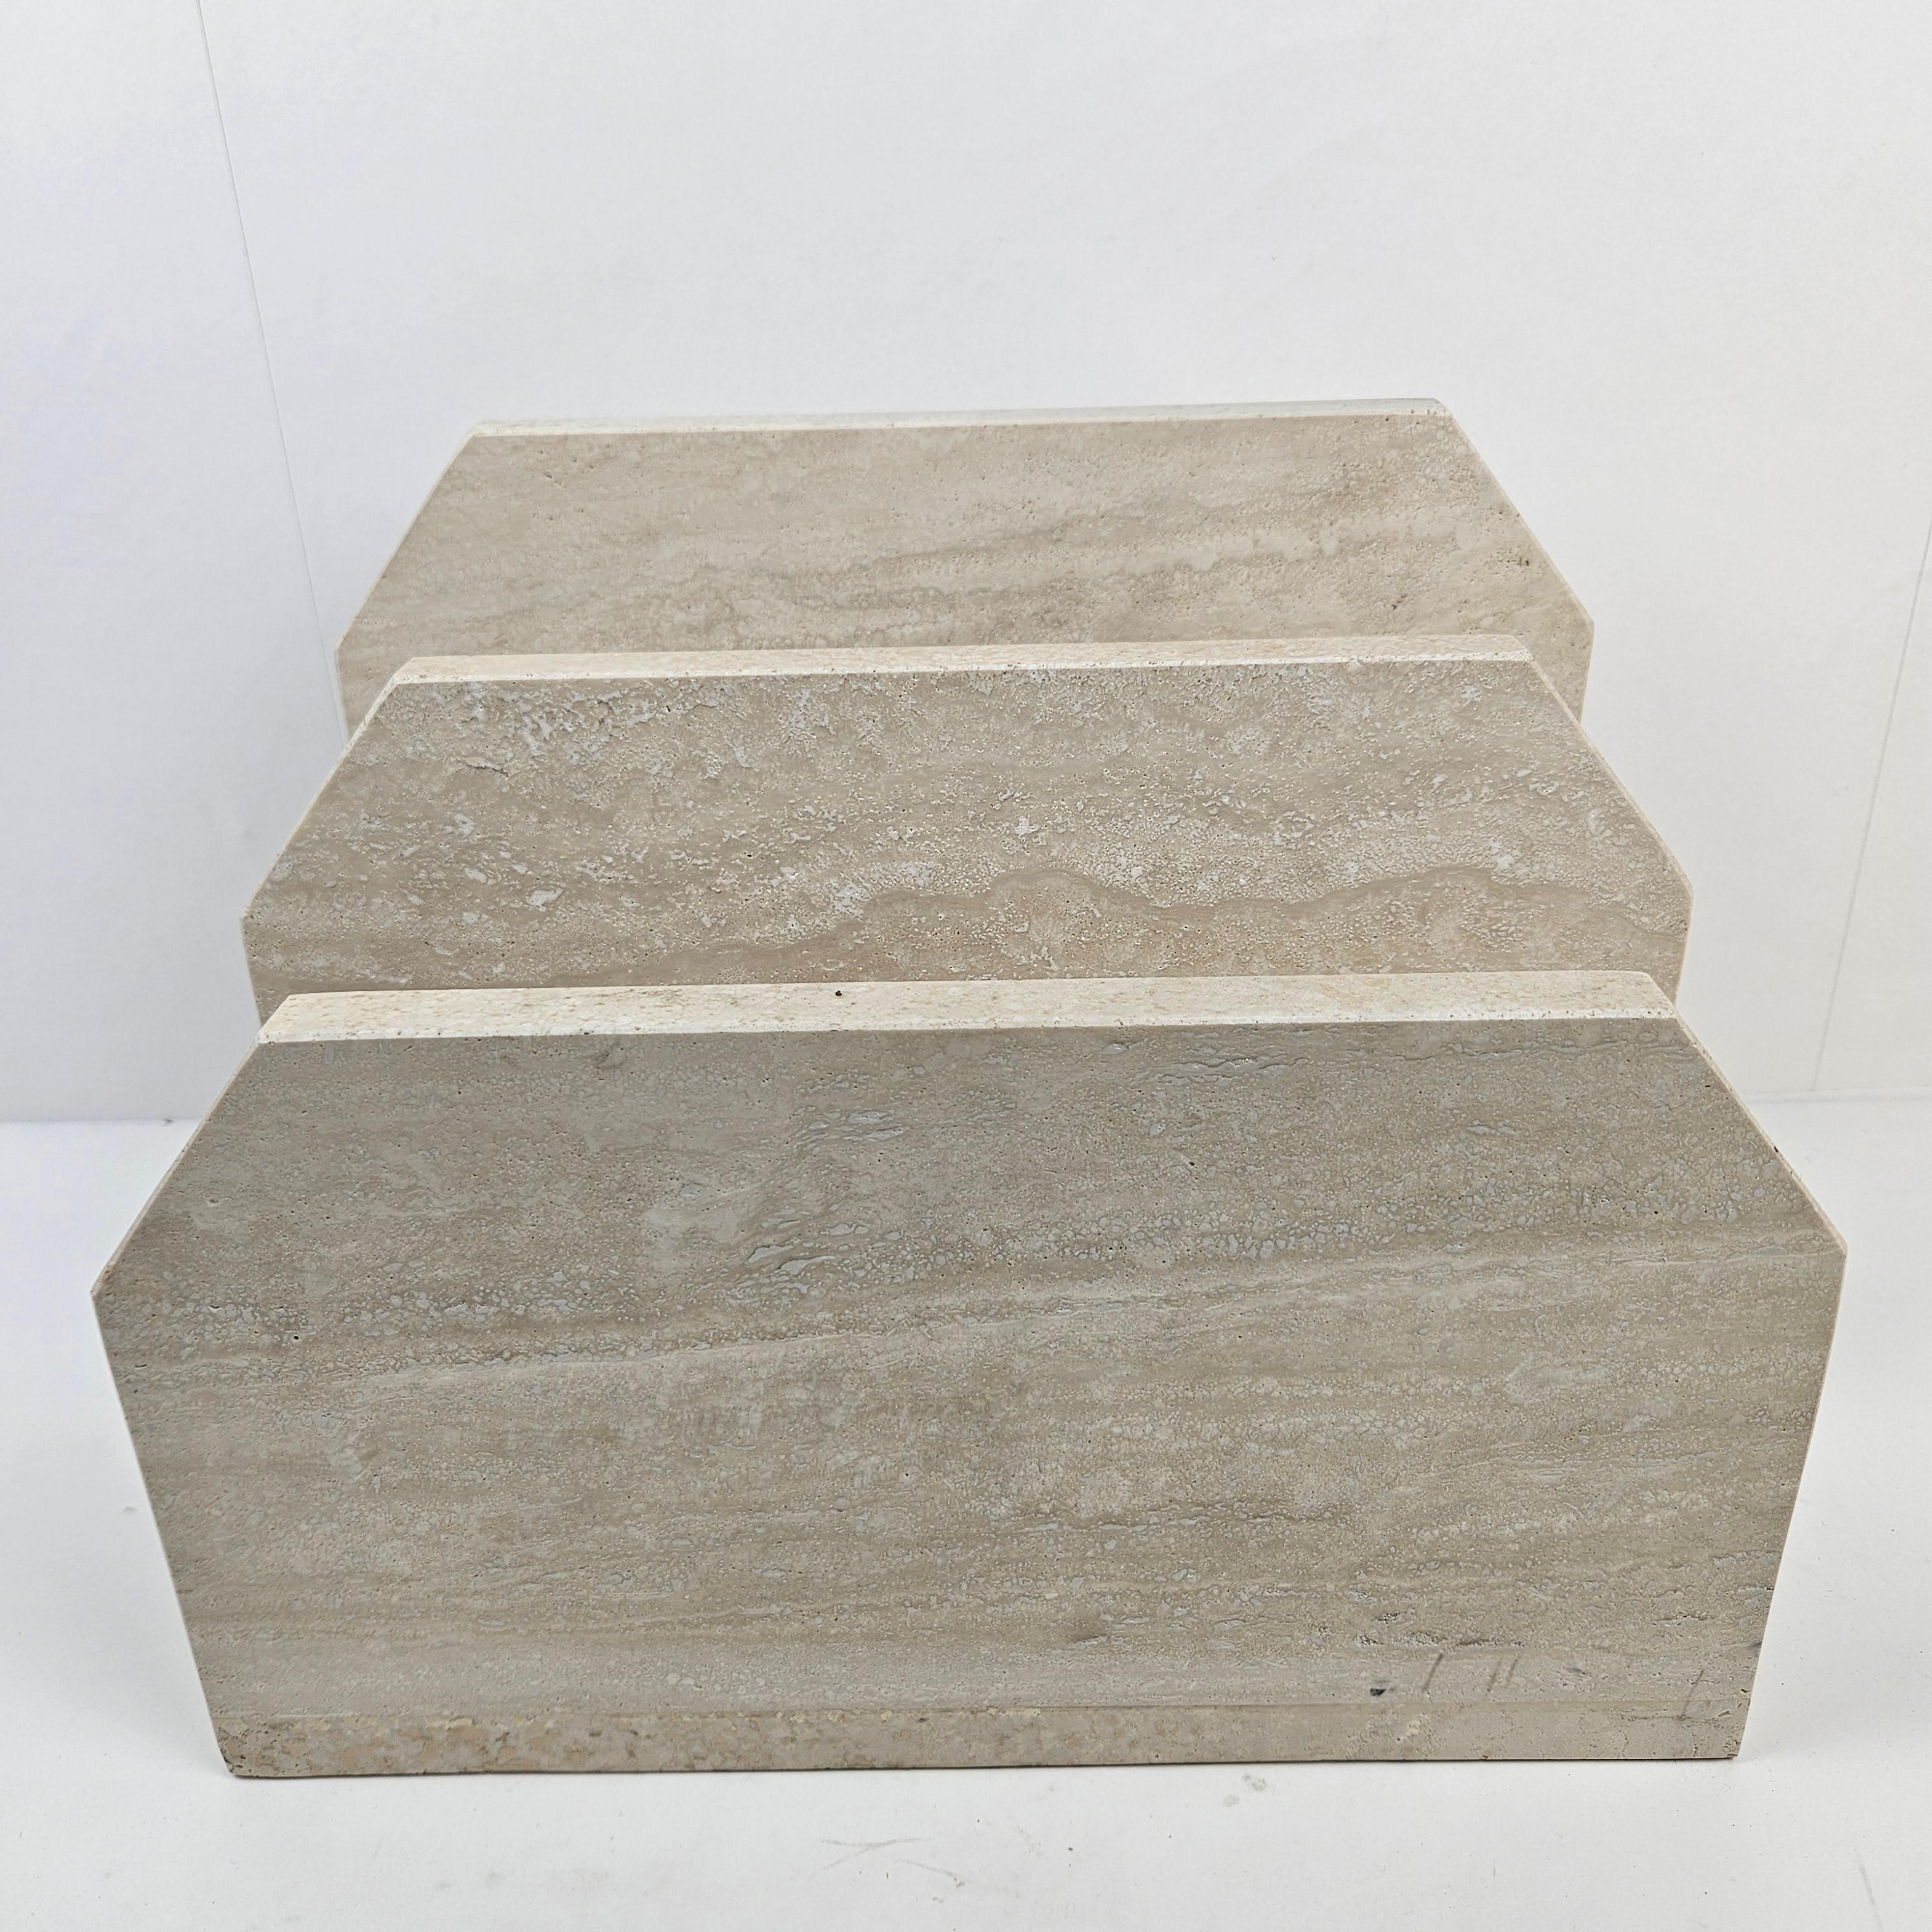 Very nice travertine magazine rack made in Italy in the 90's.

It is made of beautiful travertine. 
Please take notice of the very nice patterns.

It is in very good condition, one tiny chip (see picture).

We work with professional packers and